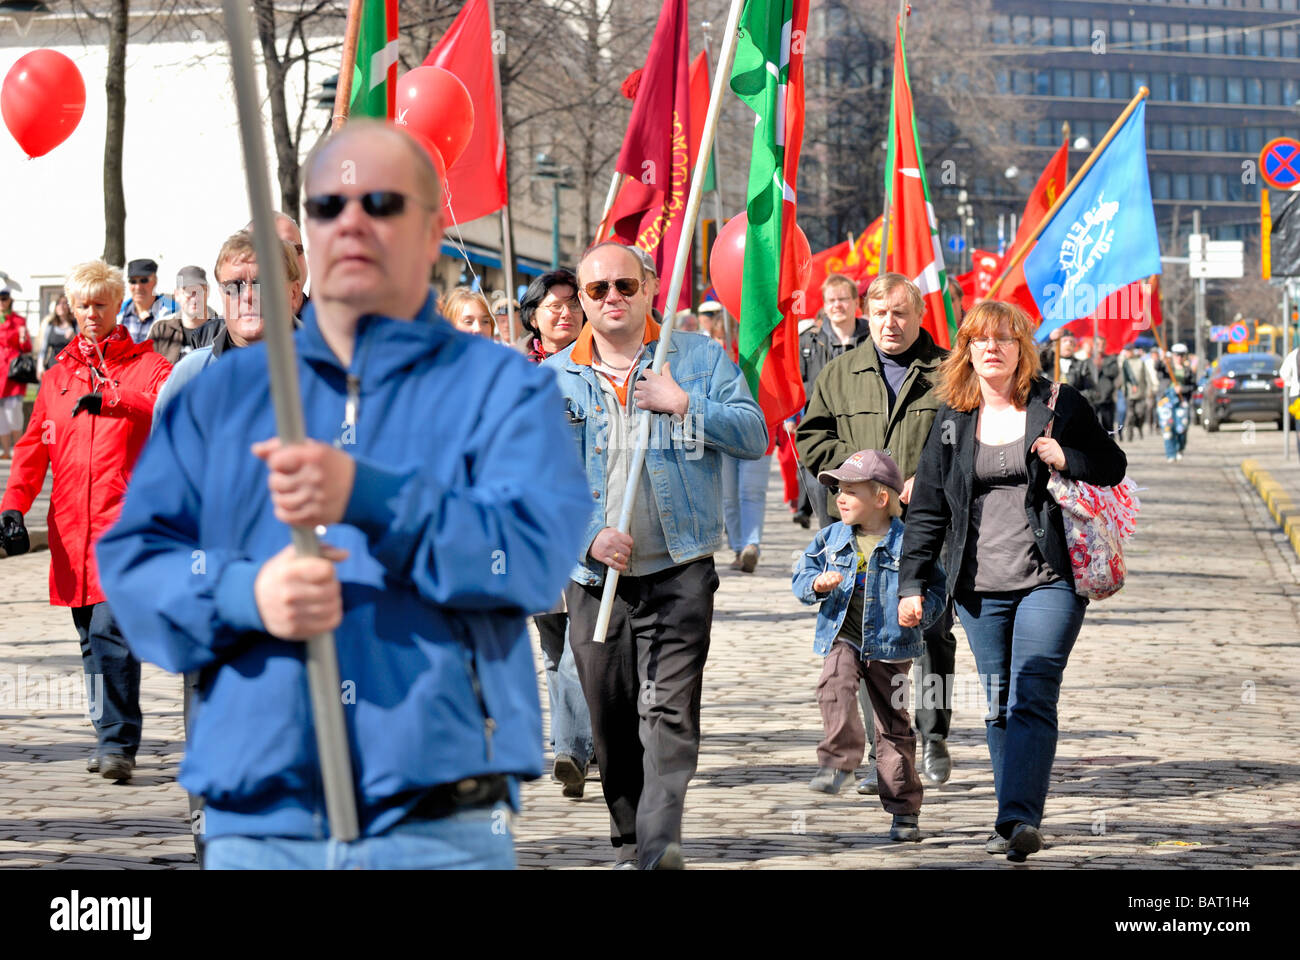 The Finnish labour union, SAK, May Day parade with the red union flag at the Esplanade. Helsinki, Finland, Scandinavia, Europe. Stock Photo